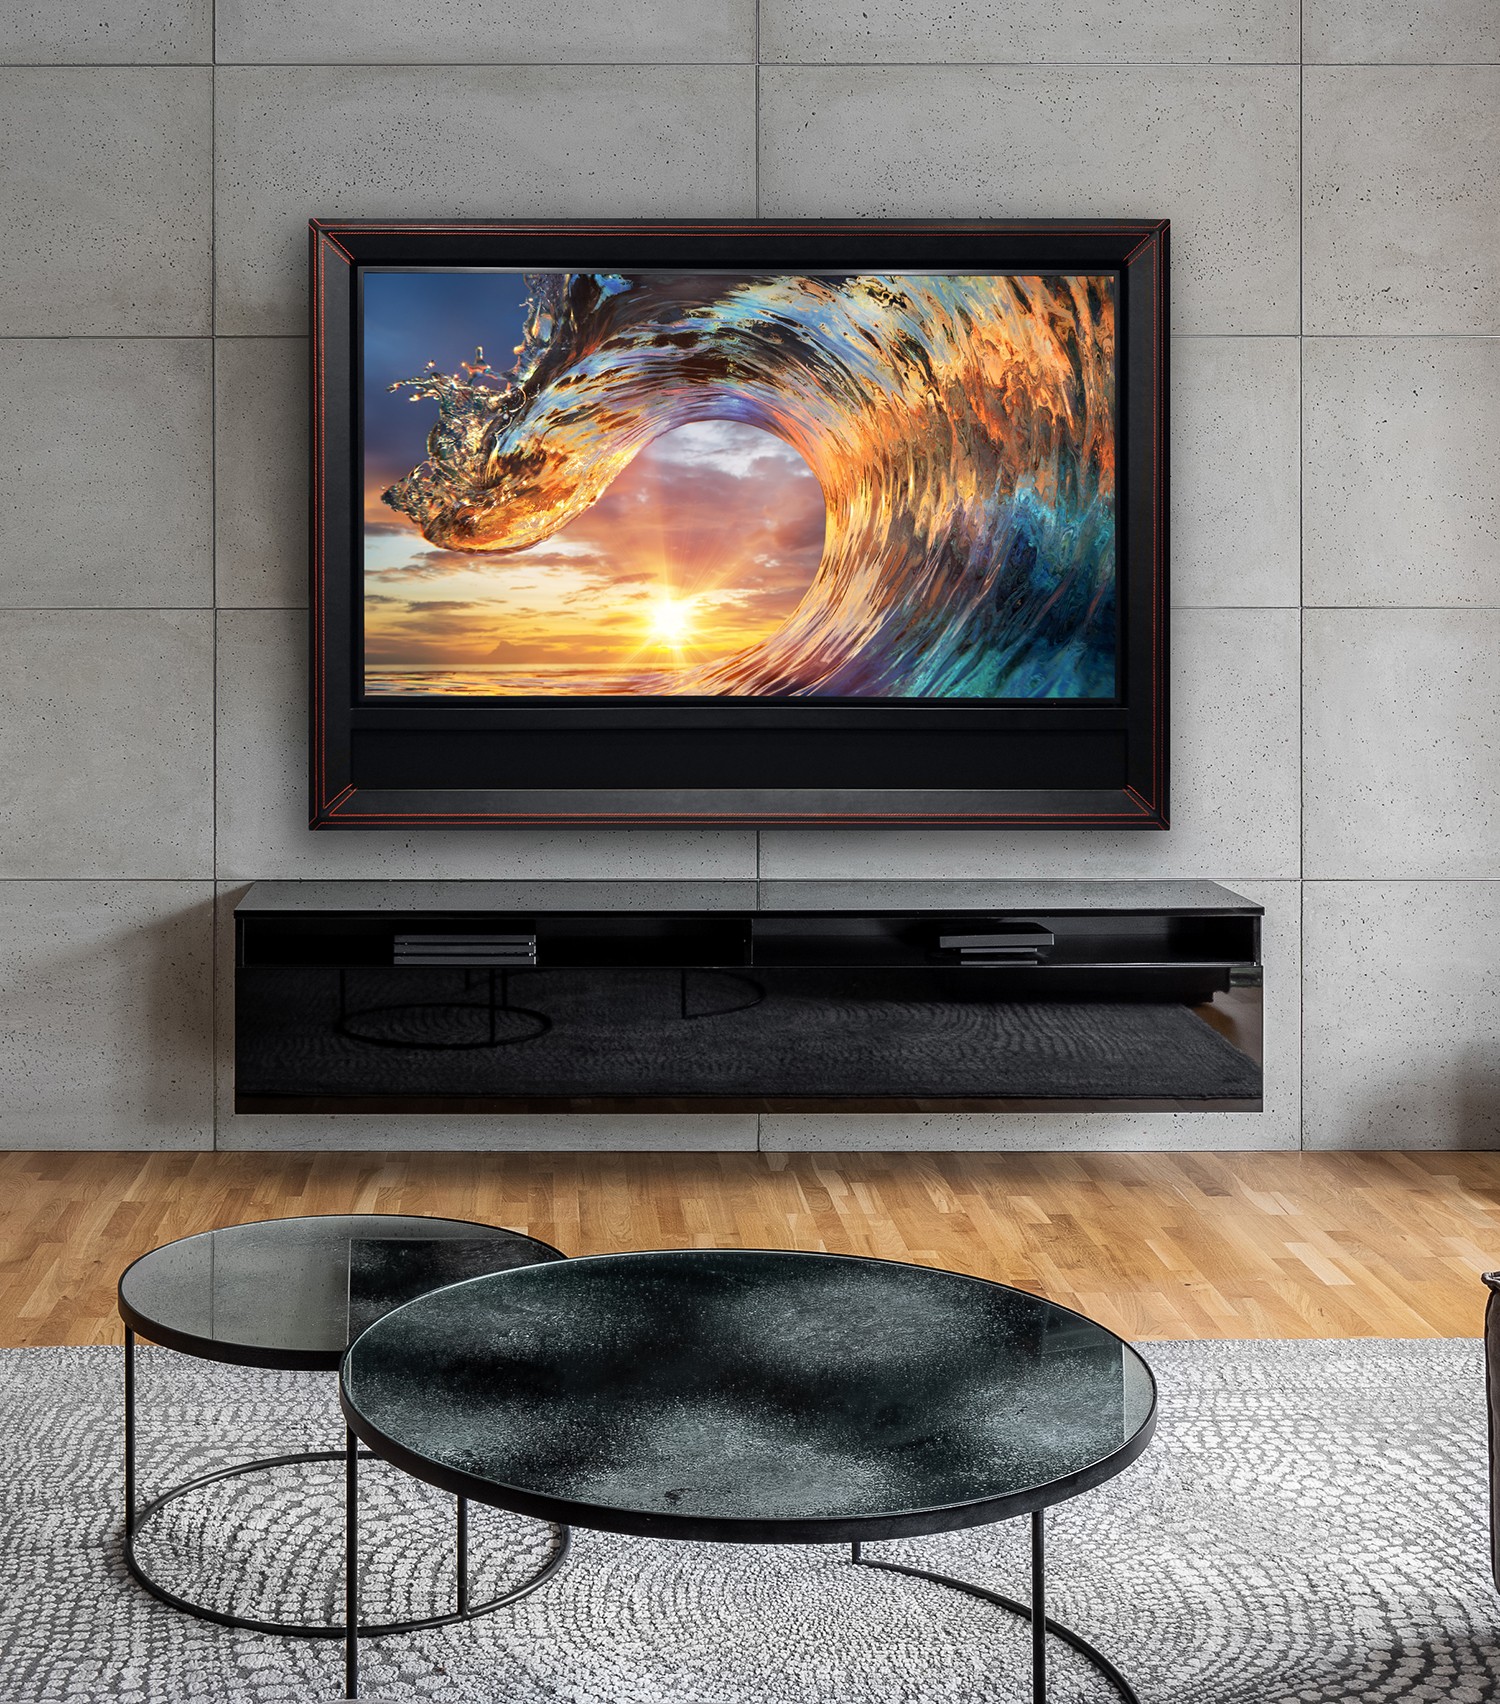 black leather framed tv with red stitching, image of wave, over a black console in room with hardwood floors, grey rug and rounded glass coffee tables